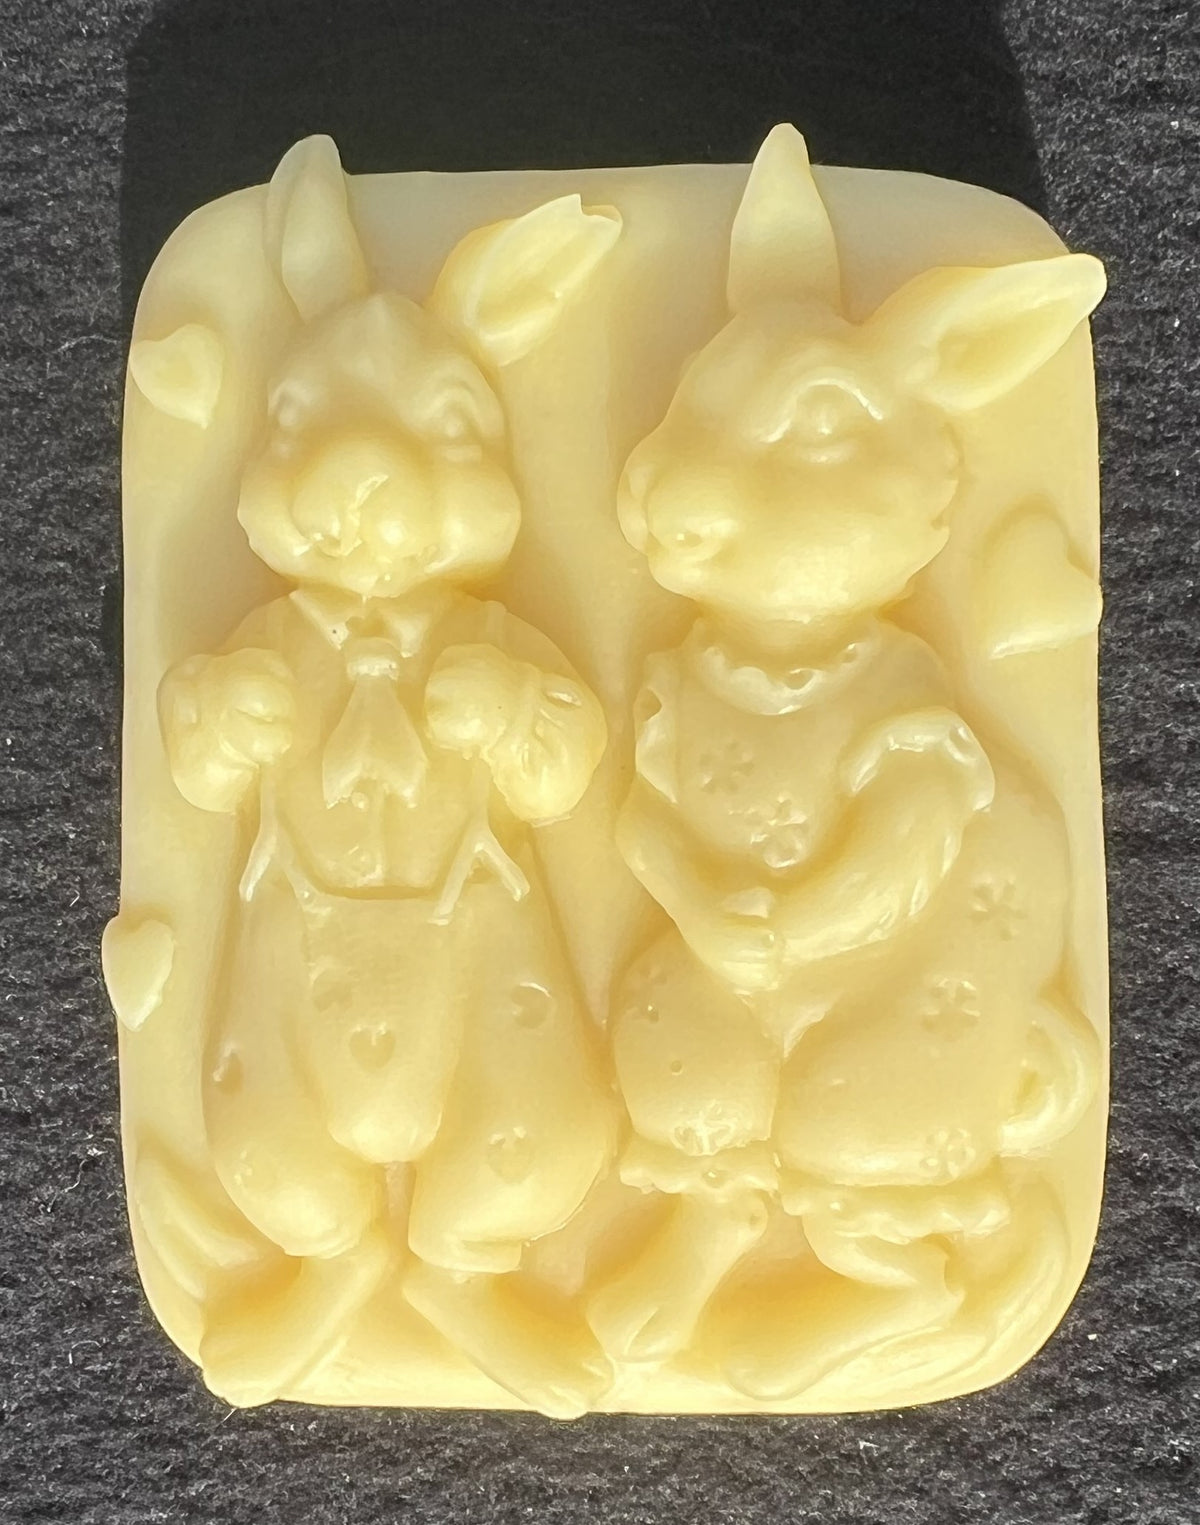 Skin Care - 3 oz Two Rabbits and Rabit with Basket Lemon/Lavender Body Butter Lotion Bars